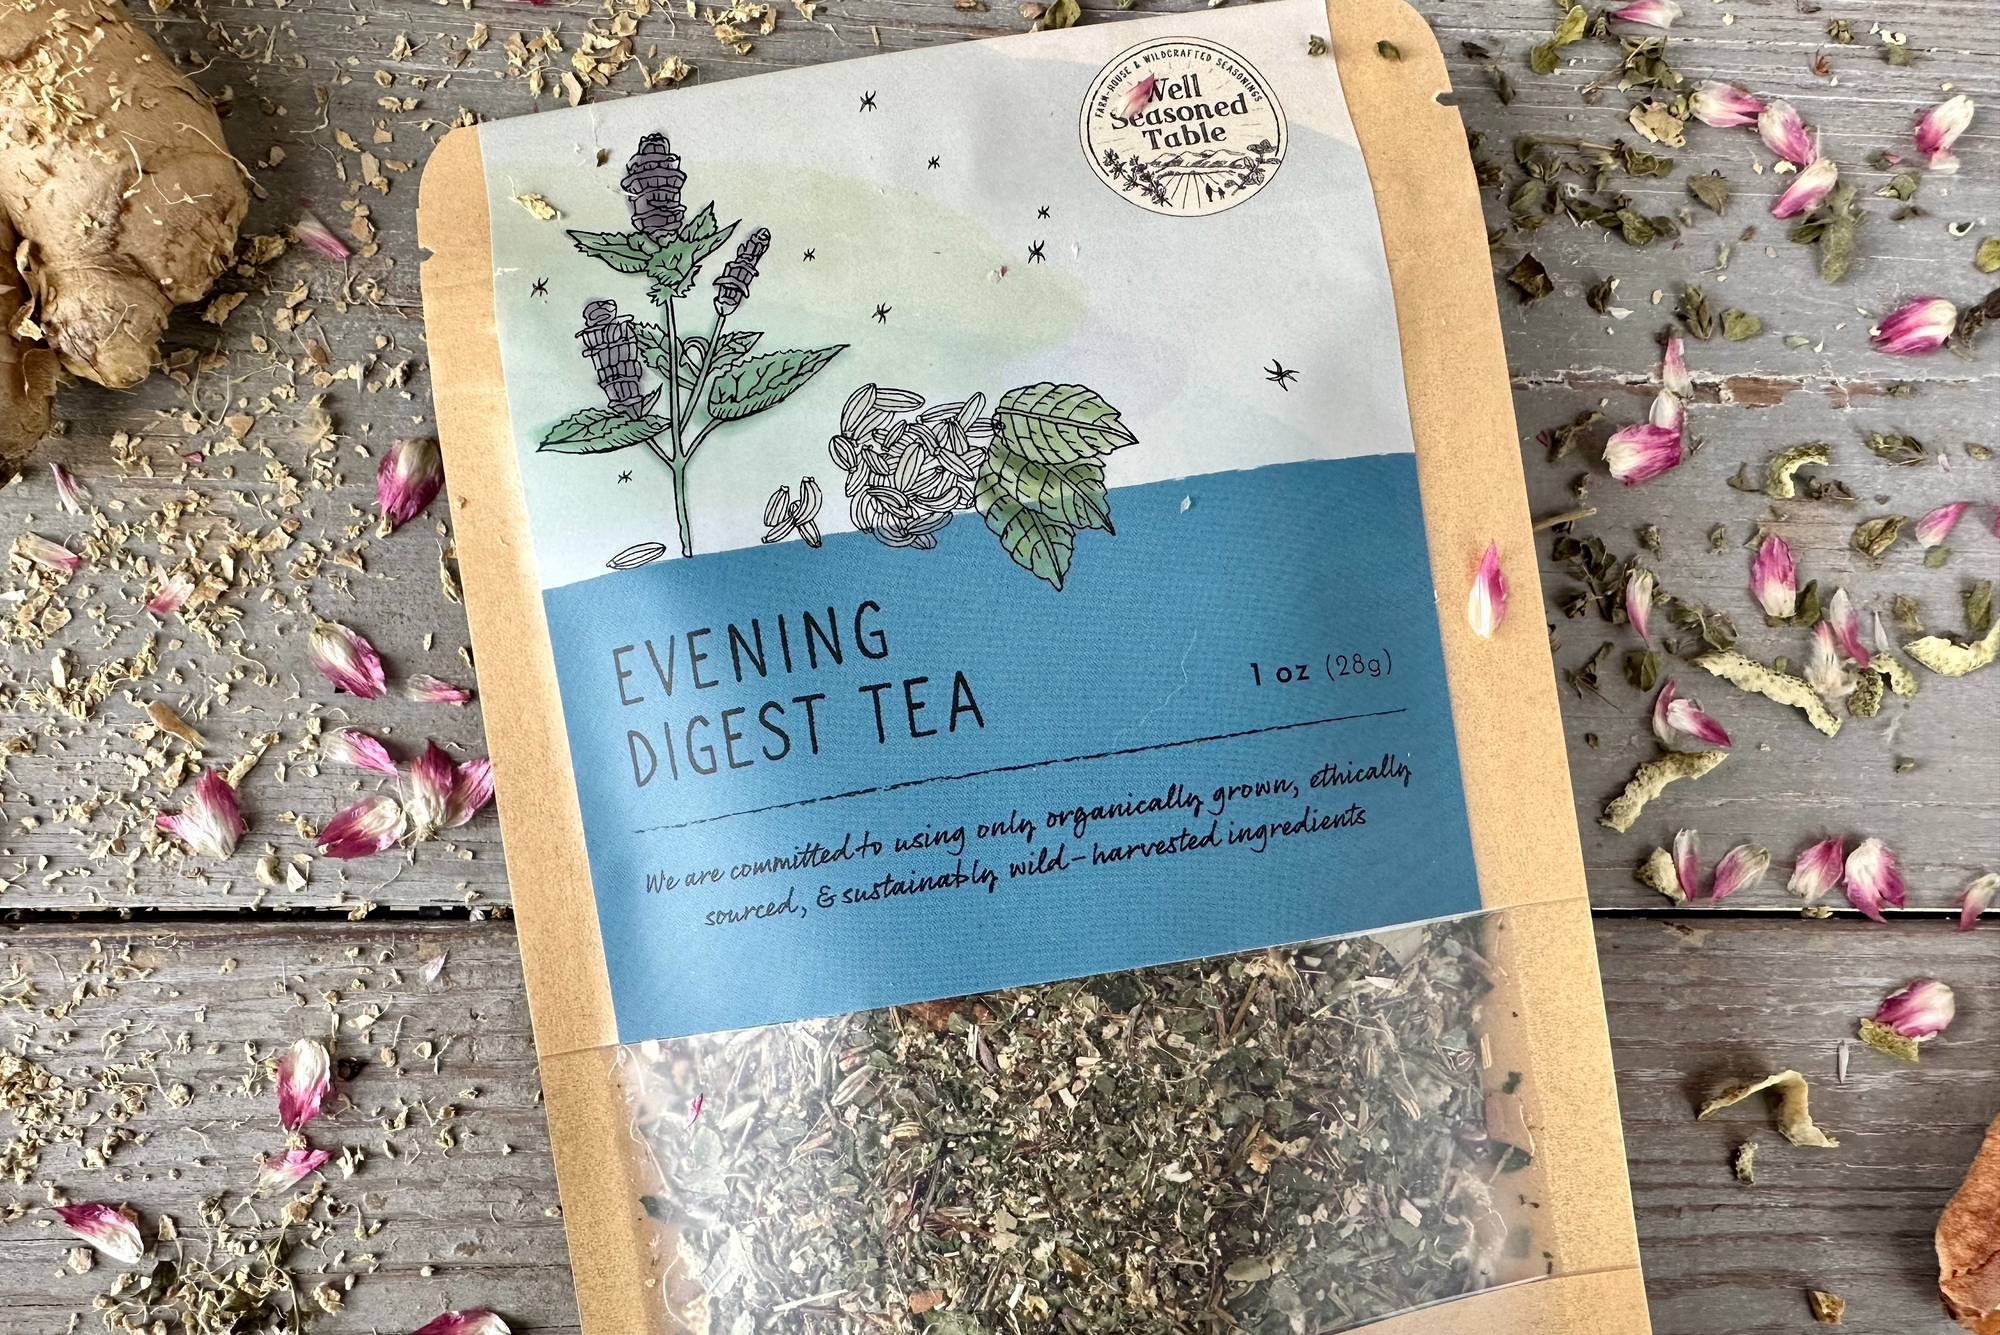 Closeup of a packet of Evening Digest Tea from Well Seasoned Table on a wooden background with ginger, dried flowers, cinnamon, and herbs around it.